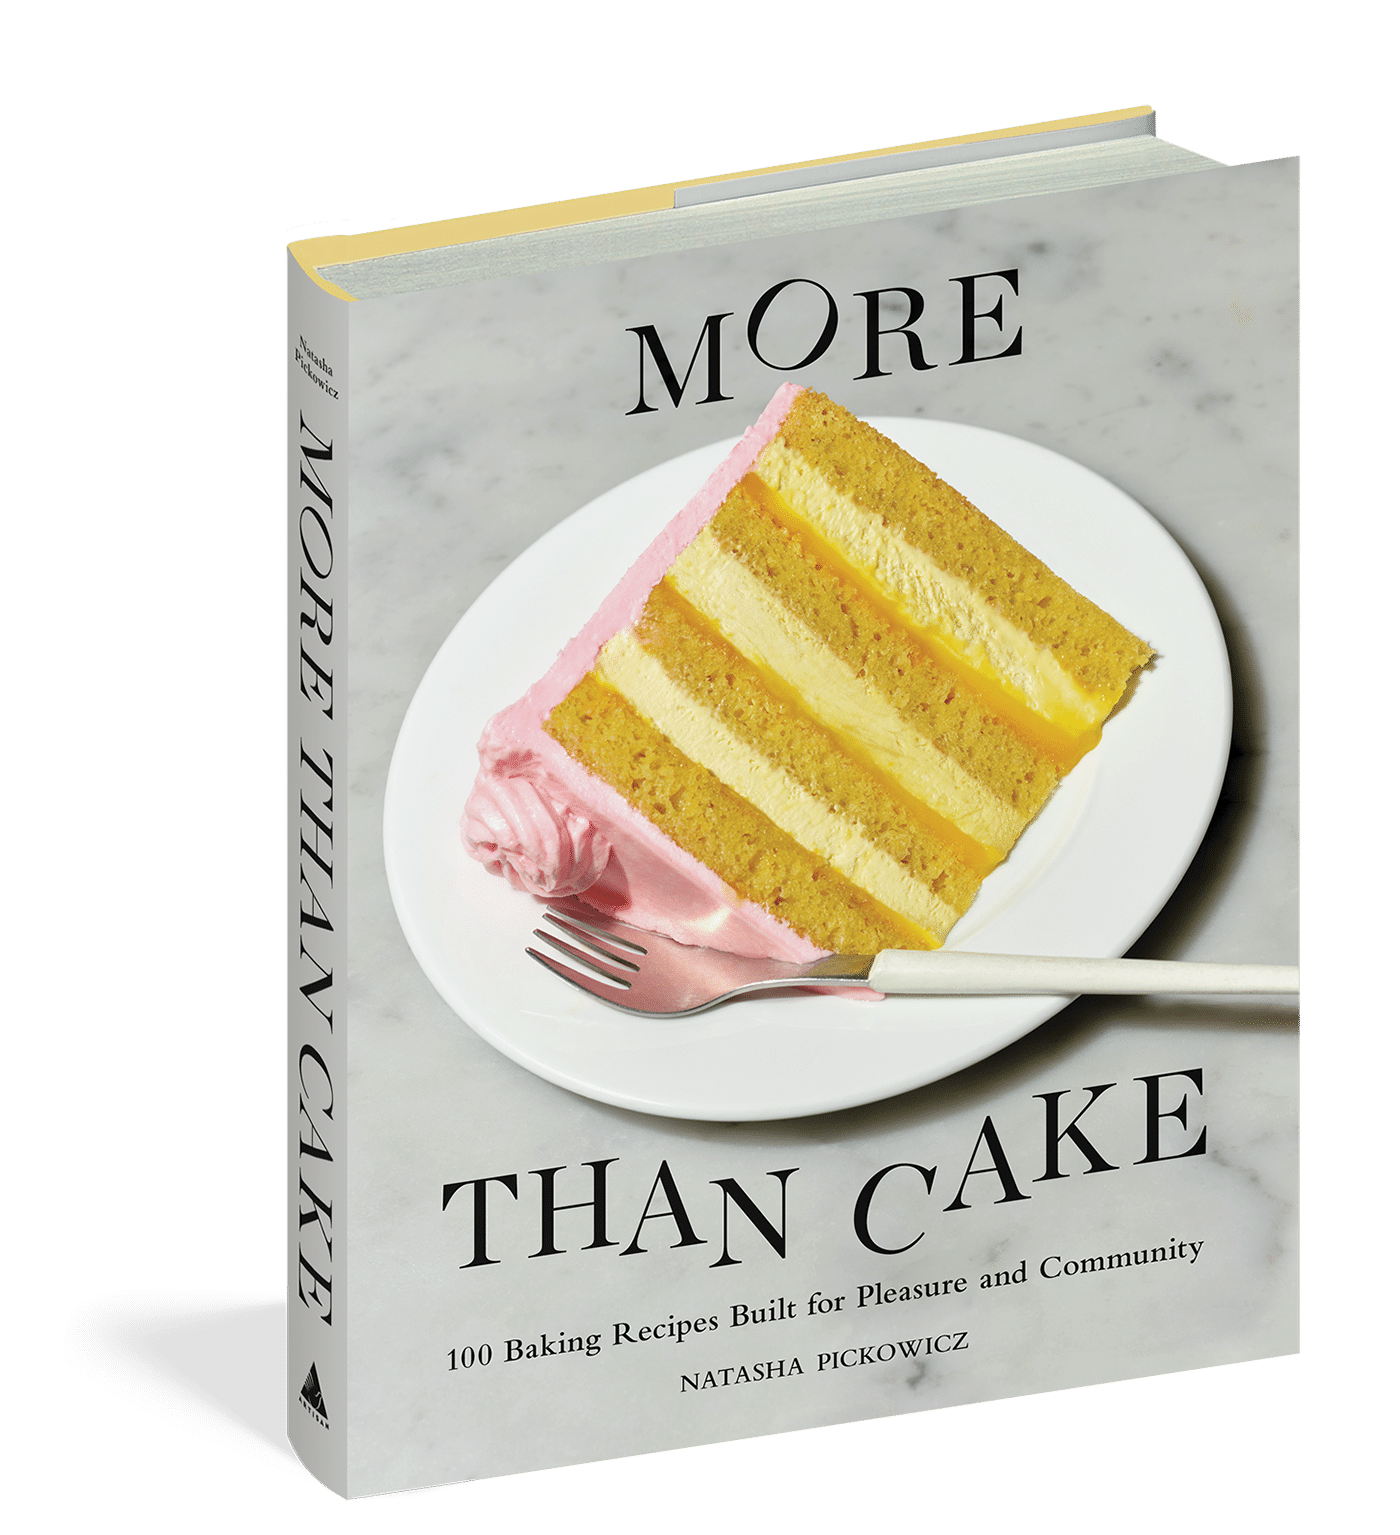 The cover of More Than Cake cookbook